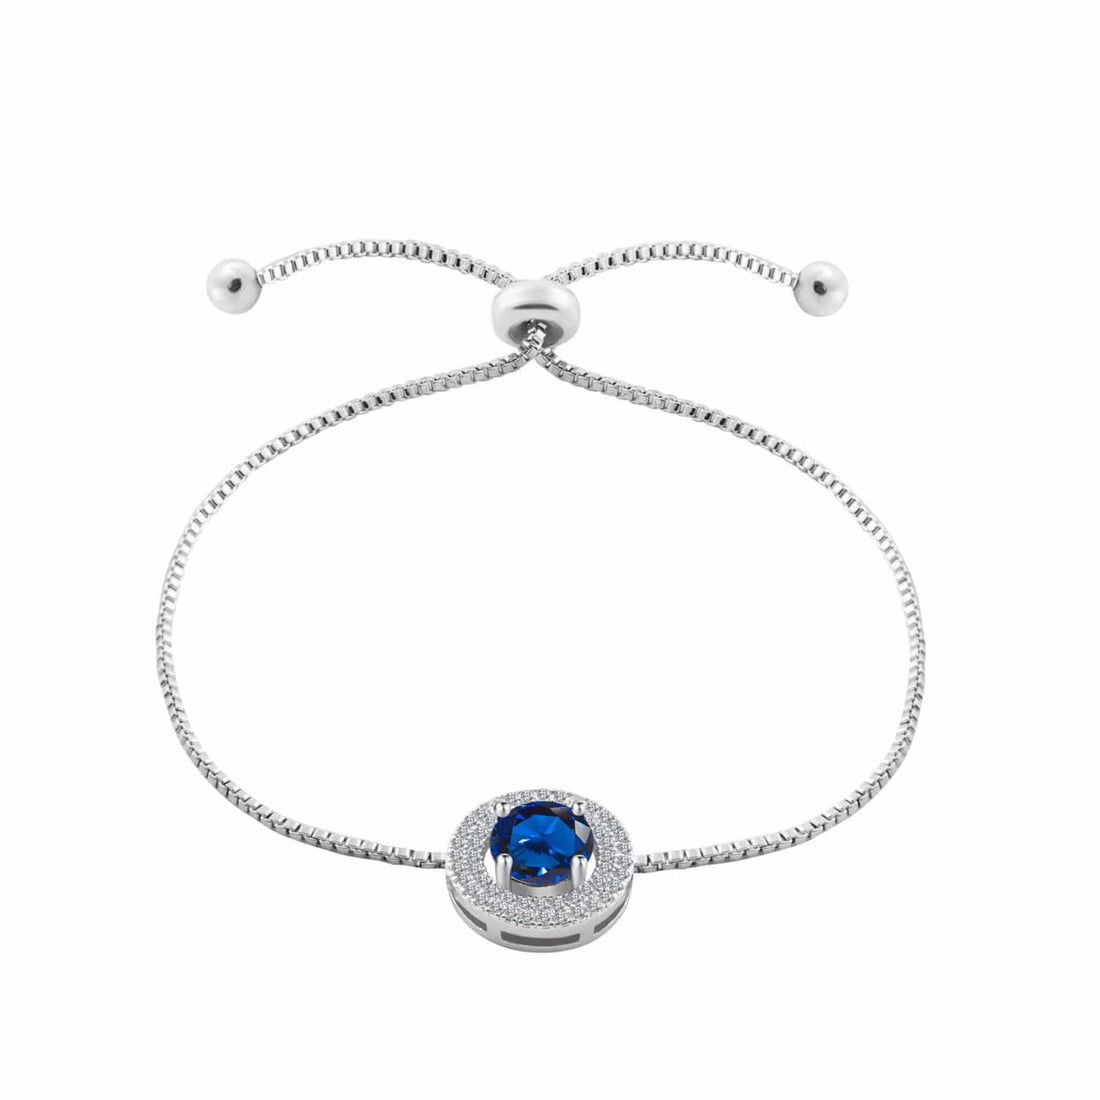 Simulated Blue Sapphire charm featuring smaller clear cut gemstones on a silver toned rhodium plated adjustable bracelet